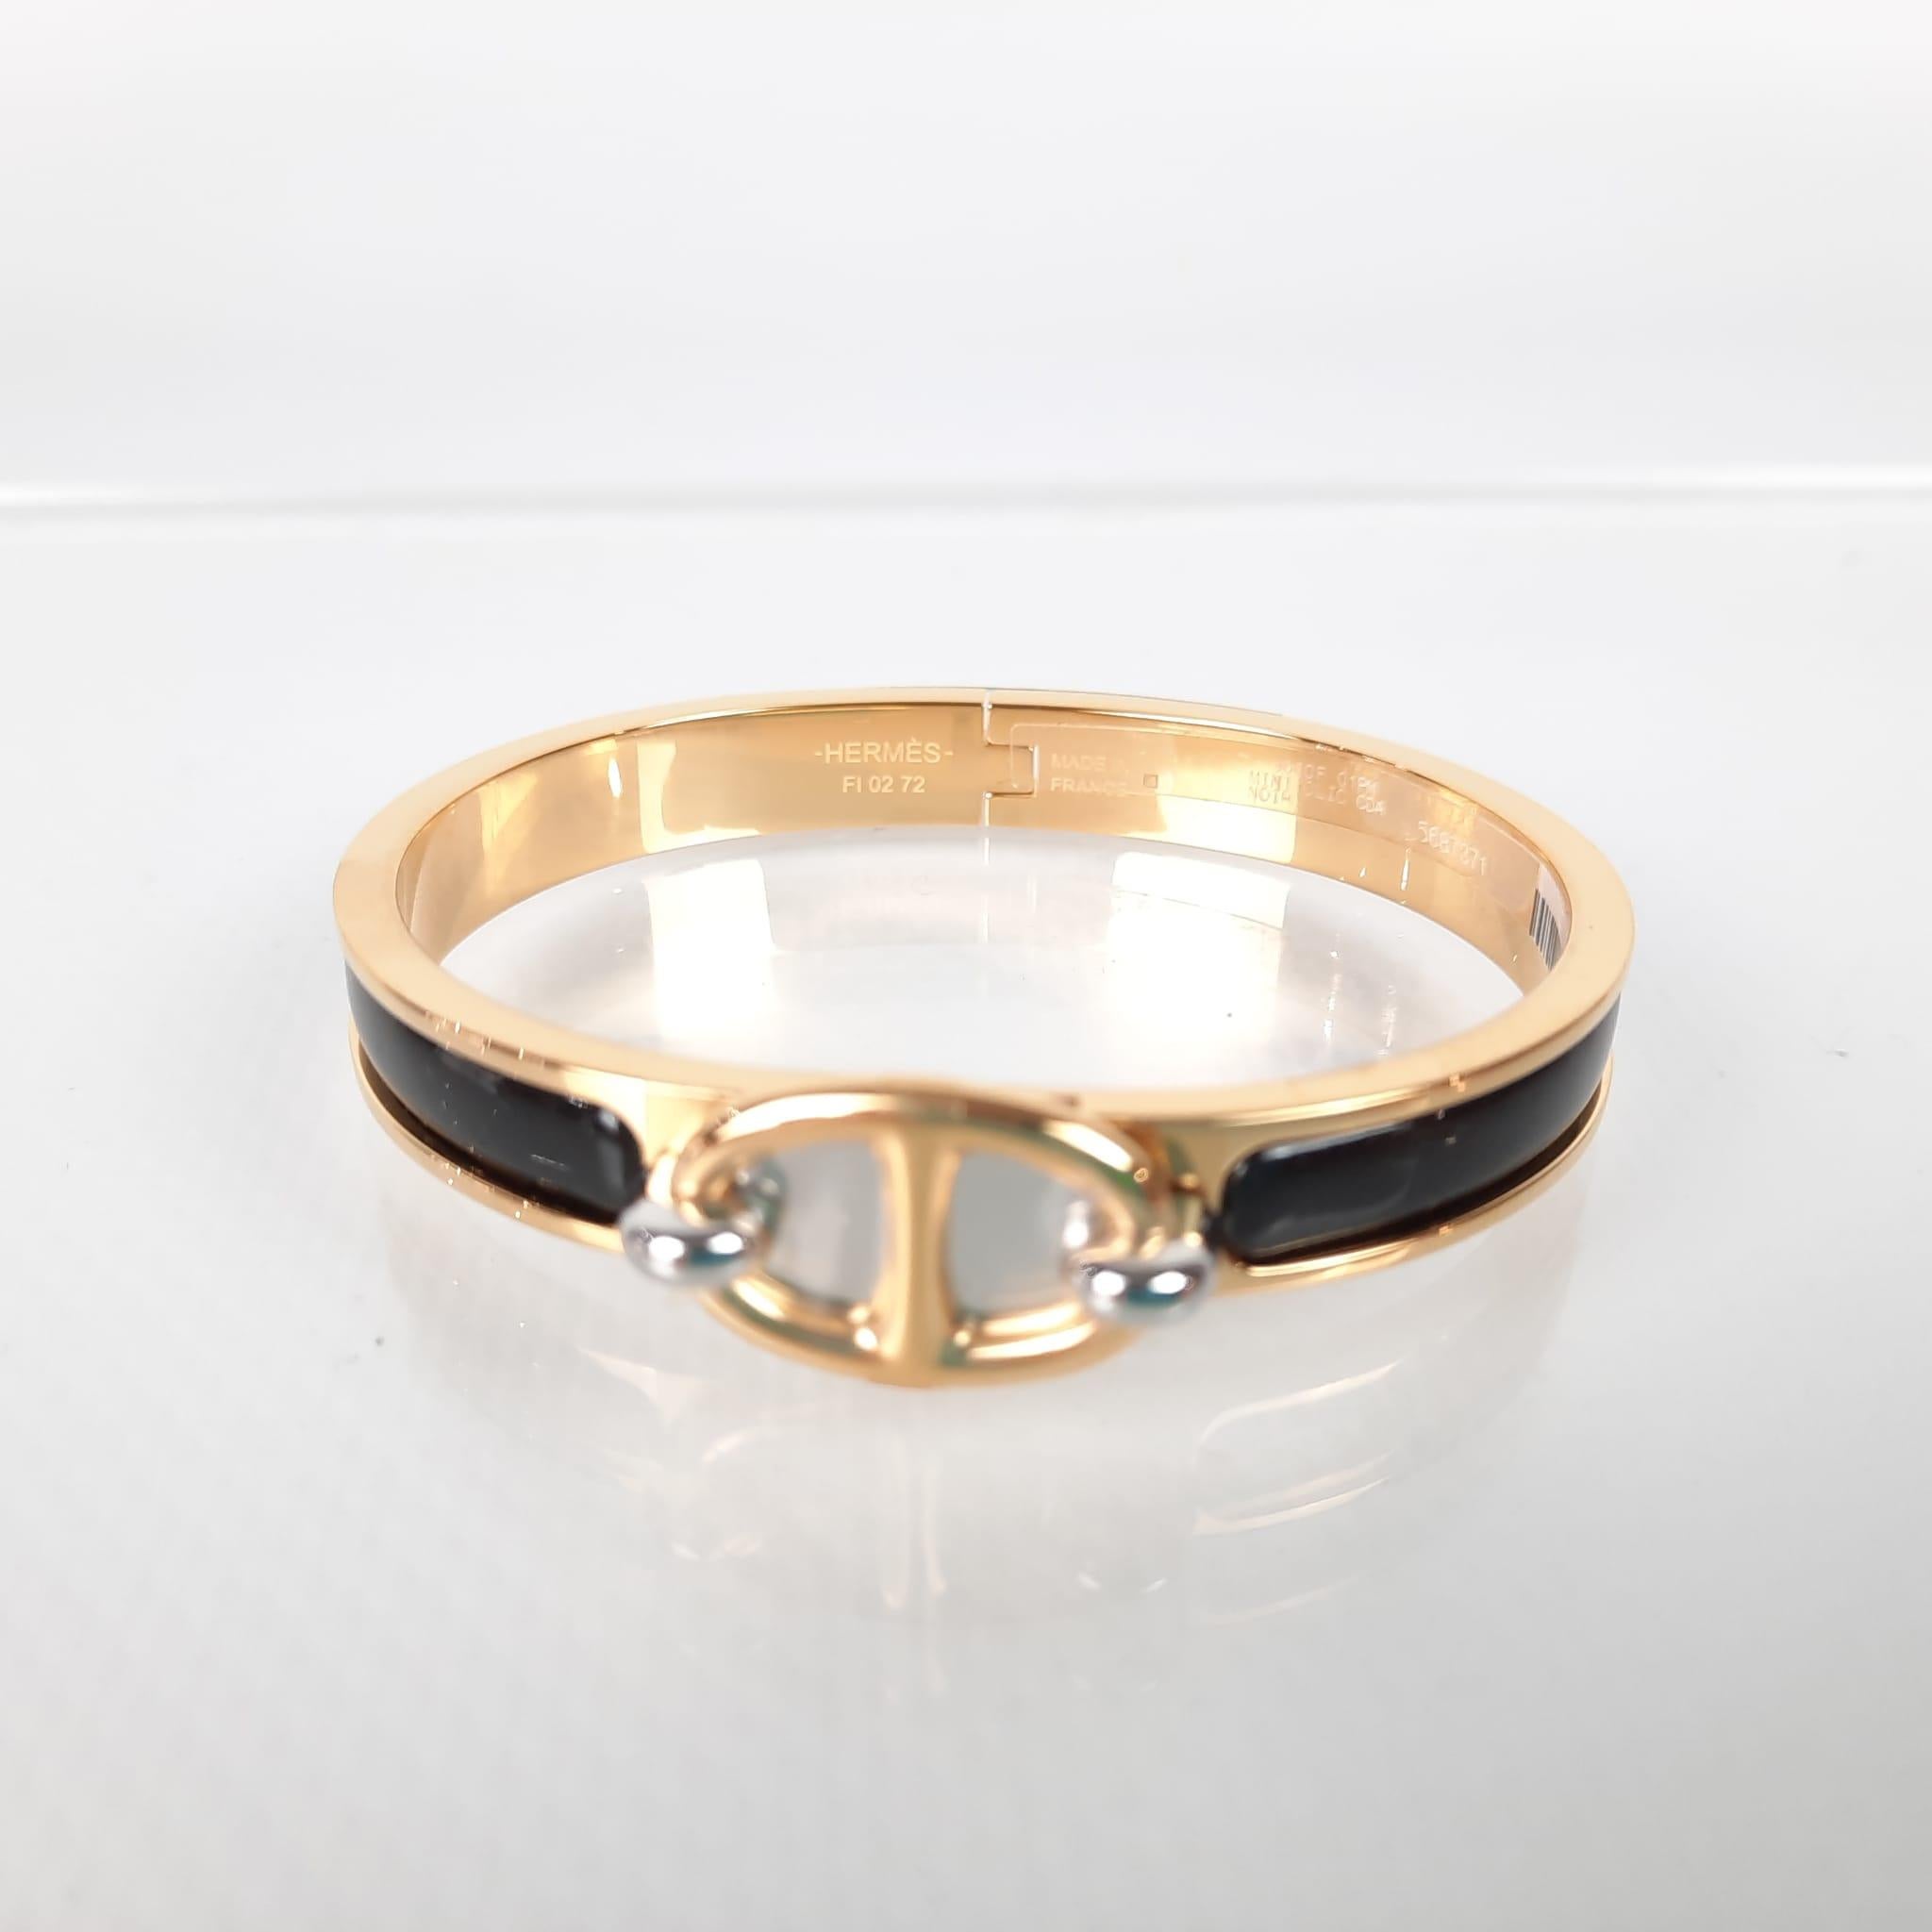 Size PM
Narrow bracelet in plain enamel with gold-plated hardware.
Made in France
Wrist size: 17 cm
Width: 8 mm